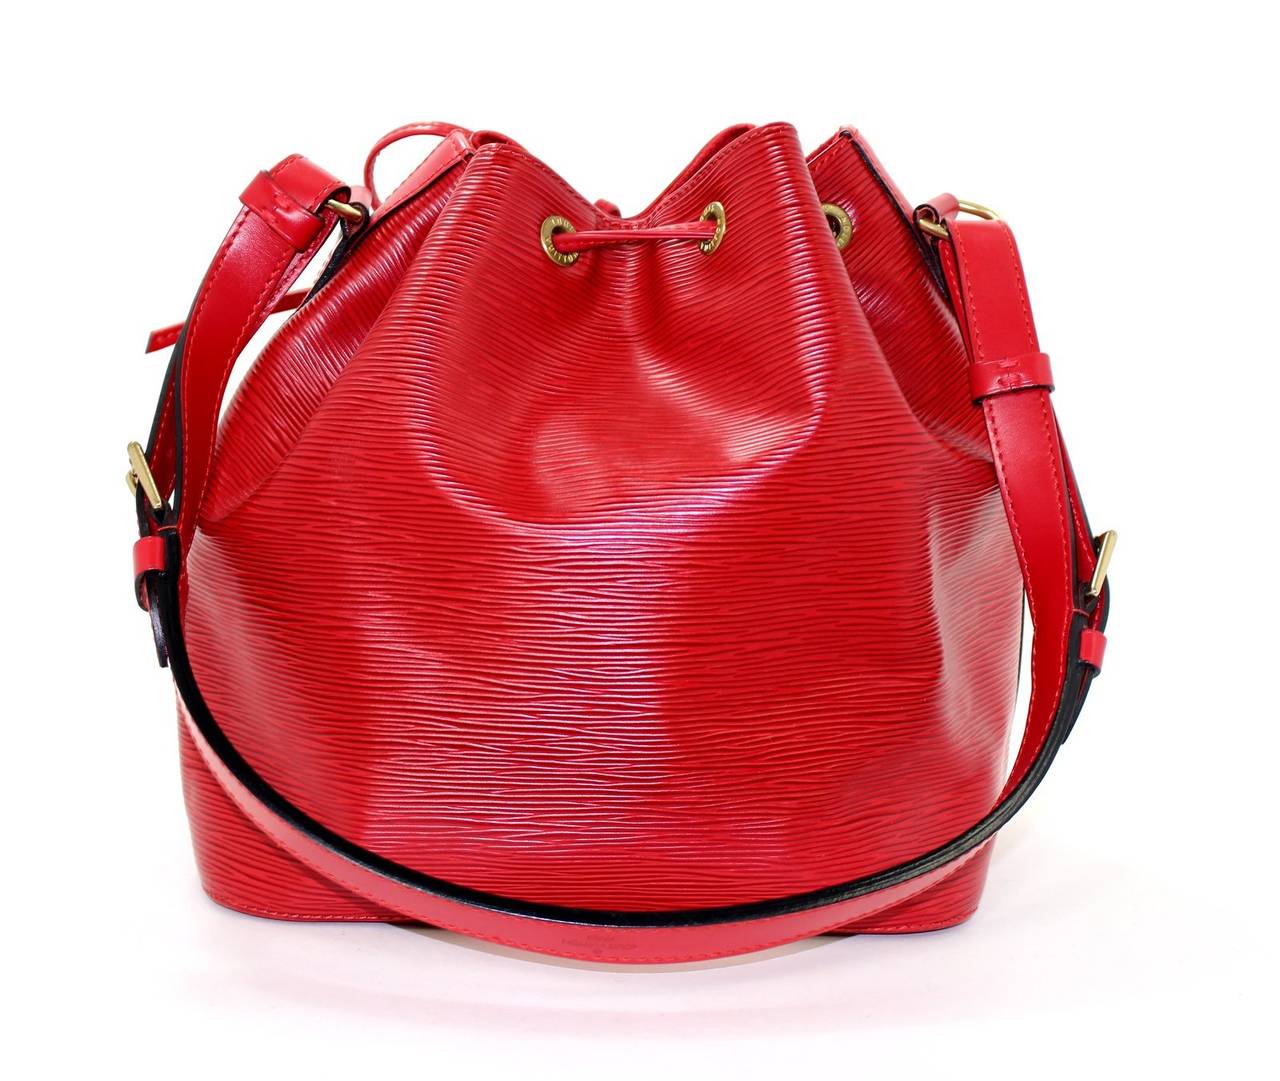 In mint condition, this Red Epi Leather Petit Noe Bucket Bag is a fantastic find with only minor signs of prior ownership. There is a small ink mark on the interior (see photo) and slight hardware scratching.  This is the original version of the